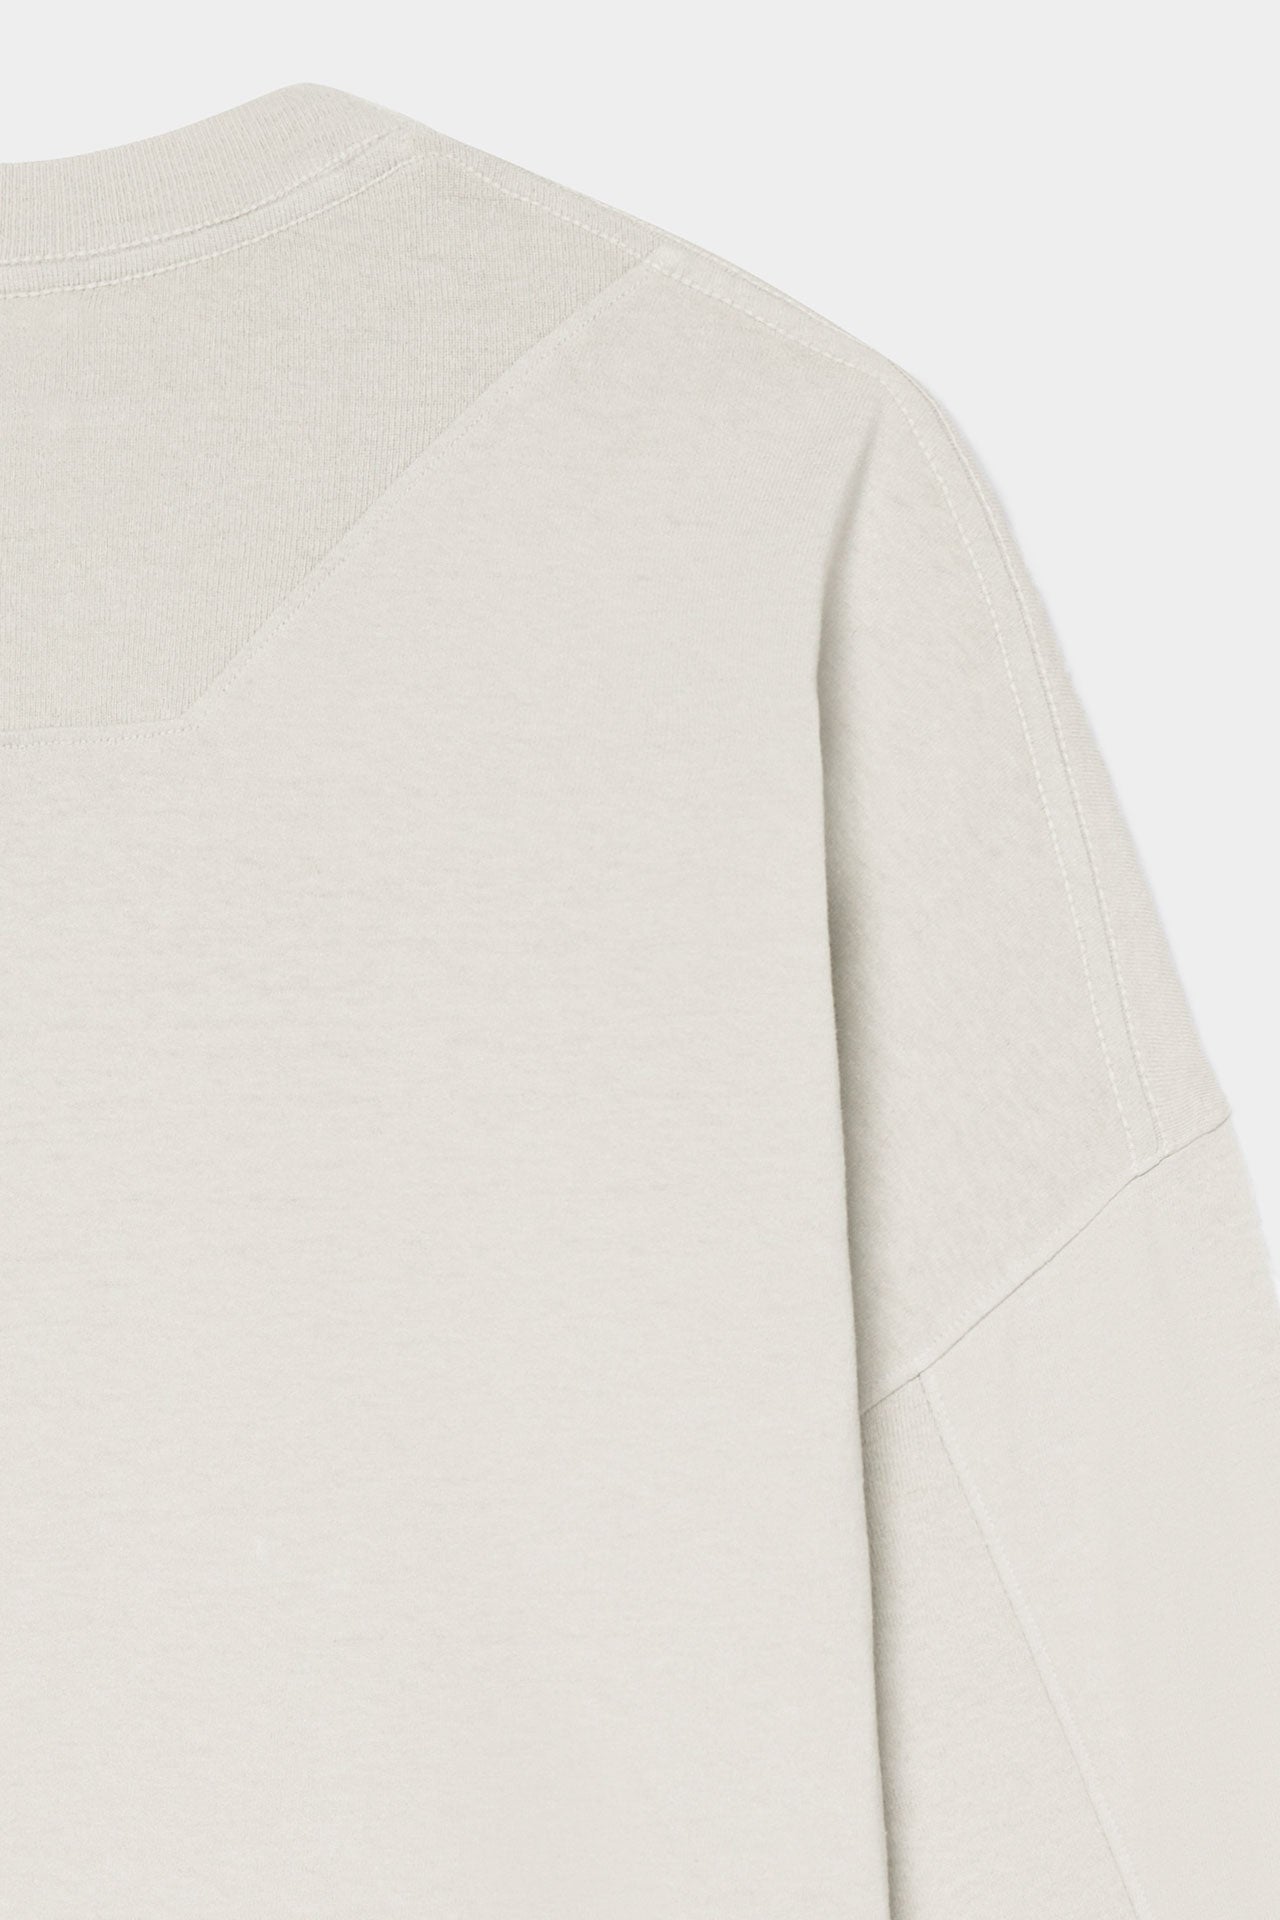 Detail back flat lay view of model posing in oversized fog cotton Vintage Long Sleeve top with a crew neckline and ribbed accents at the upper back